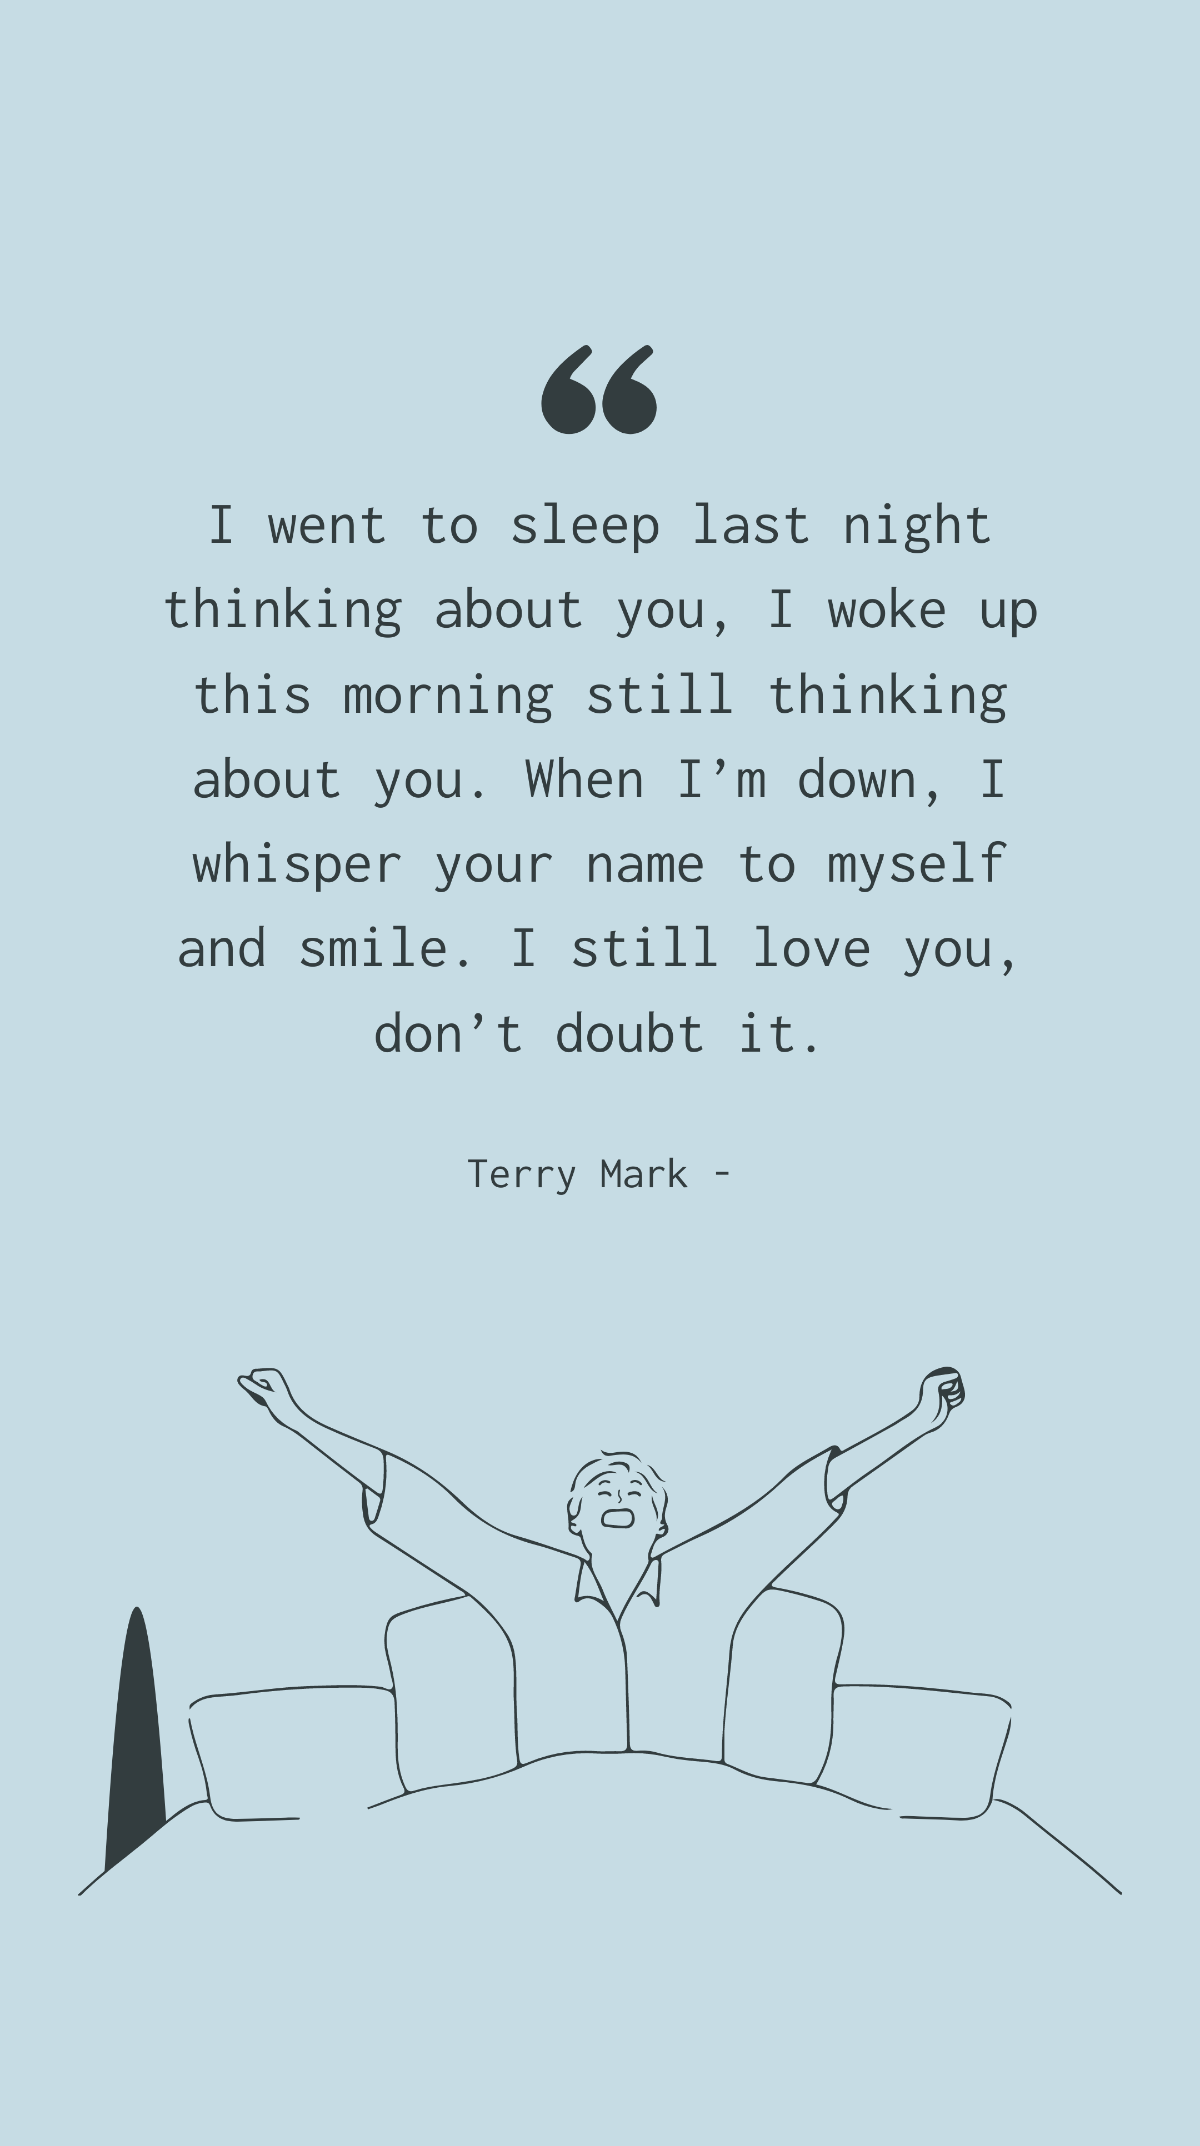 Free Terry Mark - I went to sleep last night thinking about you, I woke up this morning still thinking about you. When I’m down, I whisper your name to myself and smile. I still love you, don’t doubt it. T